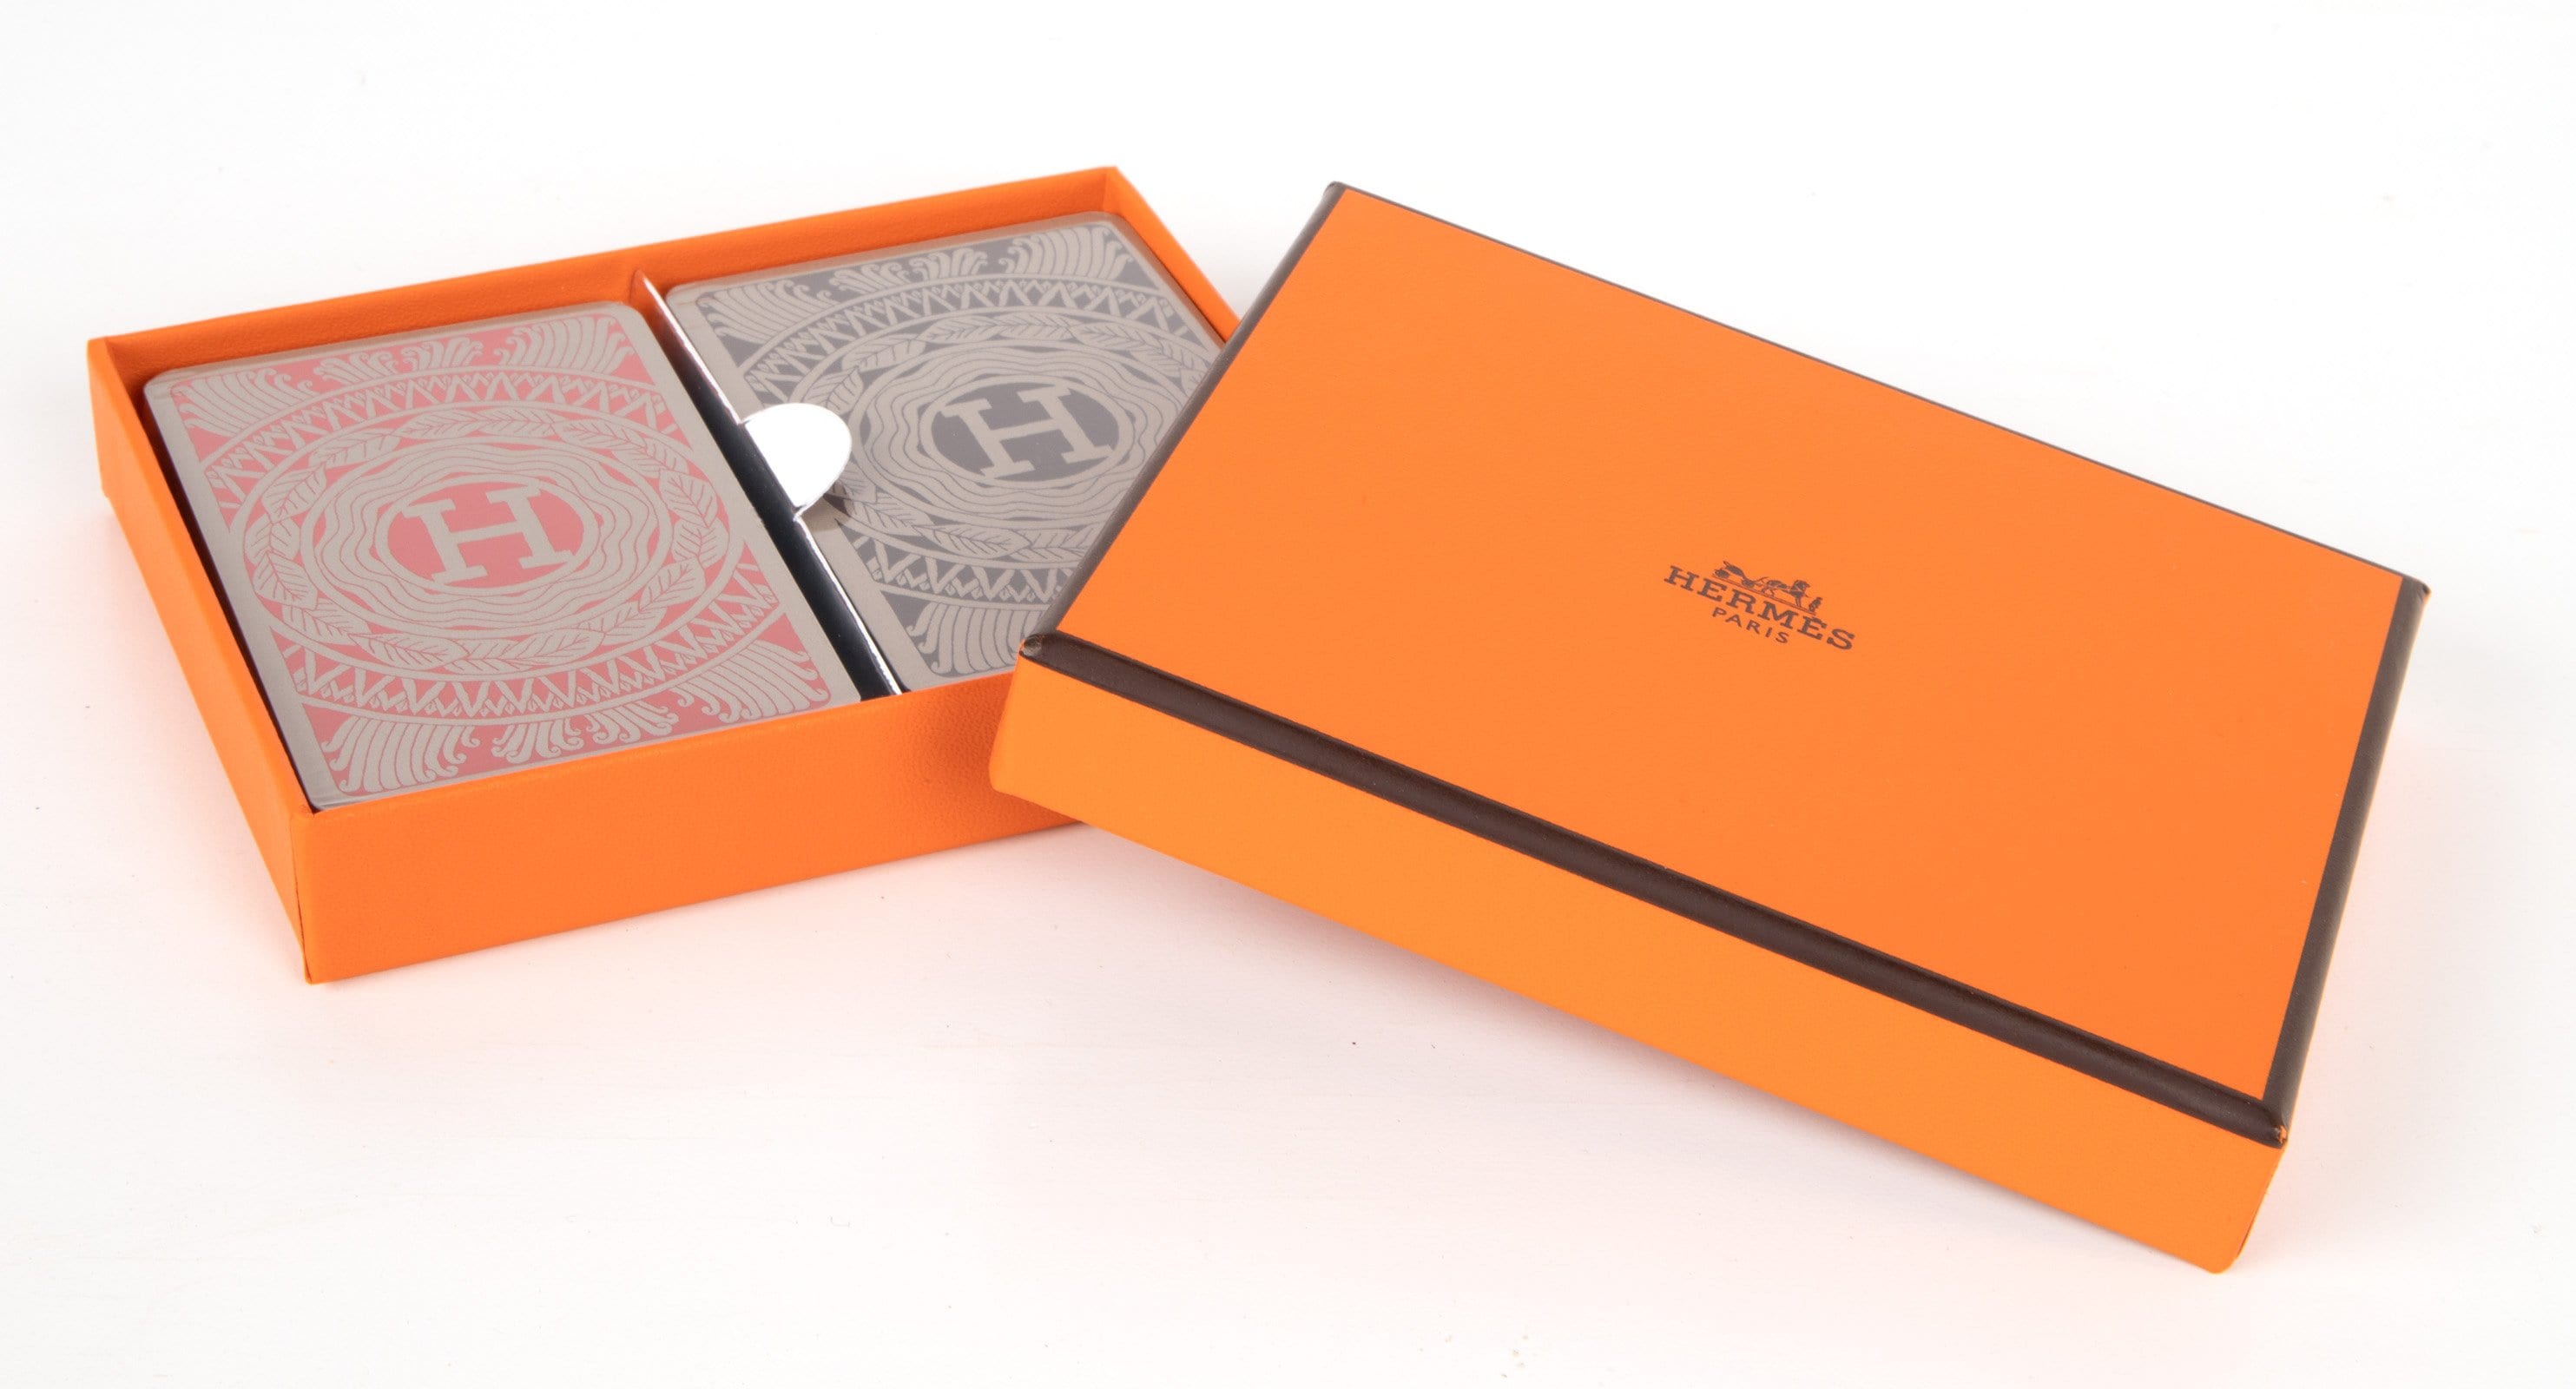 Hermes Playing Cards Les 4 Mondes 2 Deck Set – Mightychic